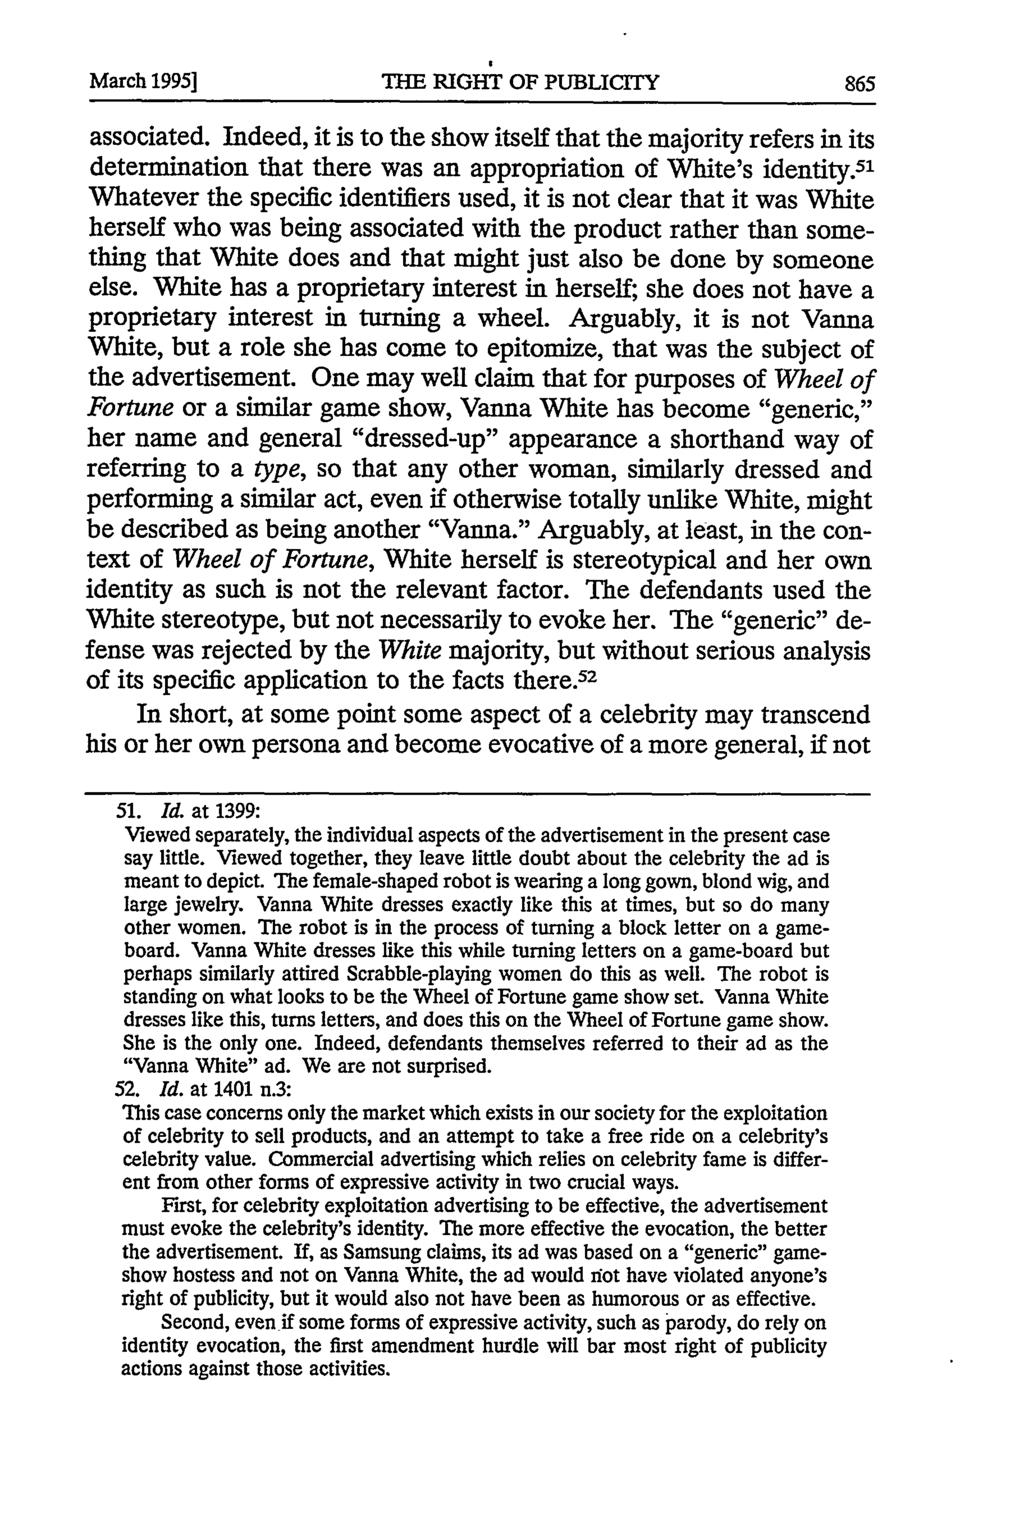 March 1995] TBE RiGHT OF PUBLICITy associated. Indeed, it is to the show itself that the majority refers in its determination that there was an appropriation of White's identity.